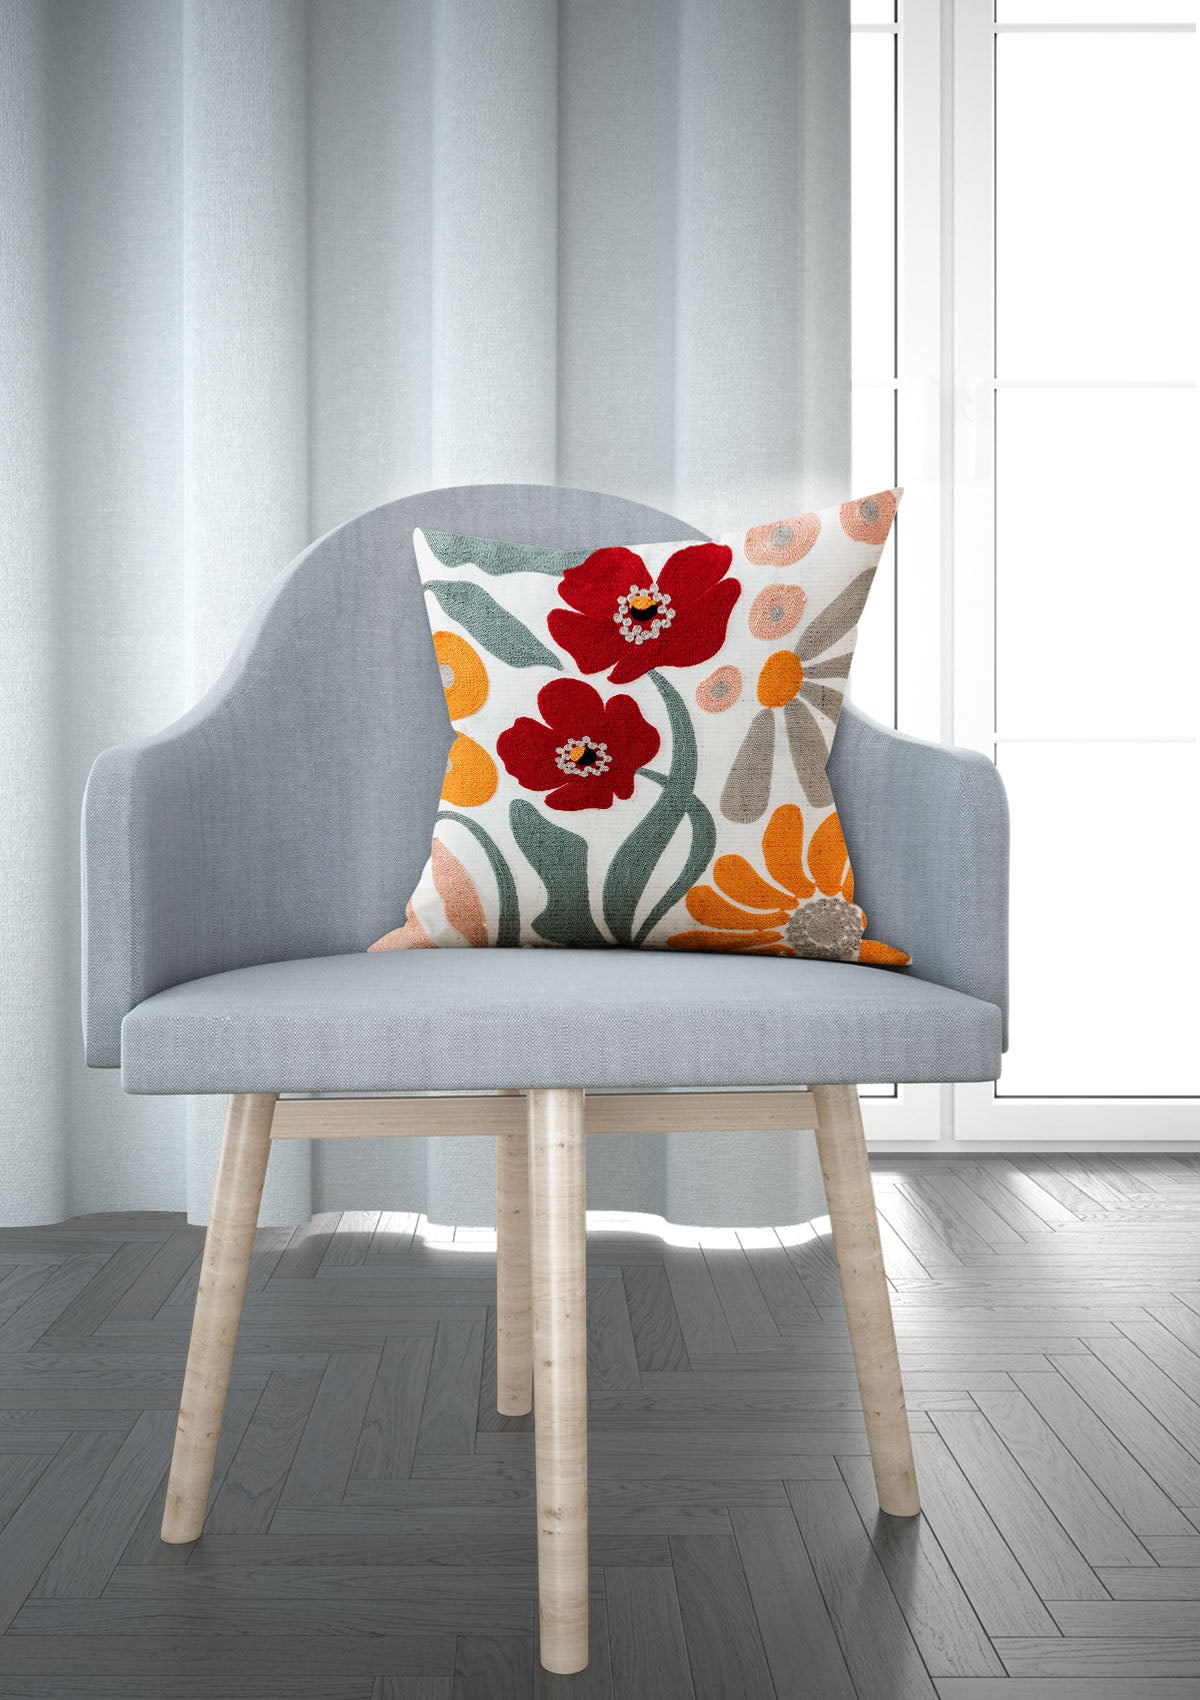 Bright floral cushion cover with colorful blooms